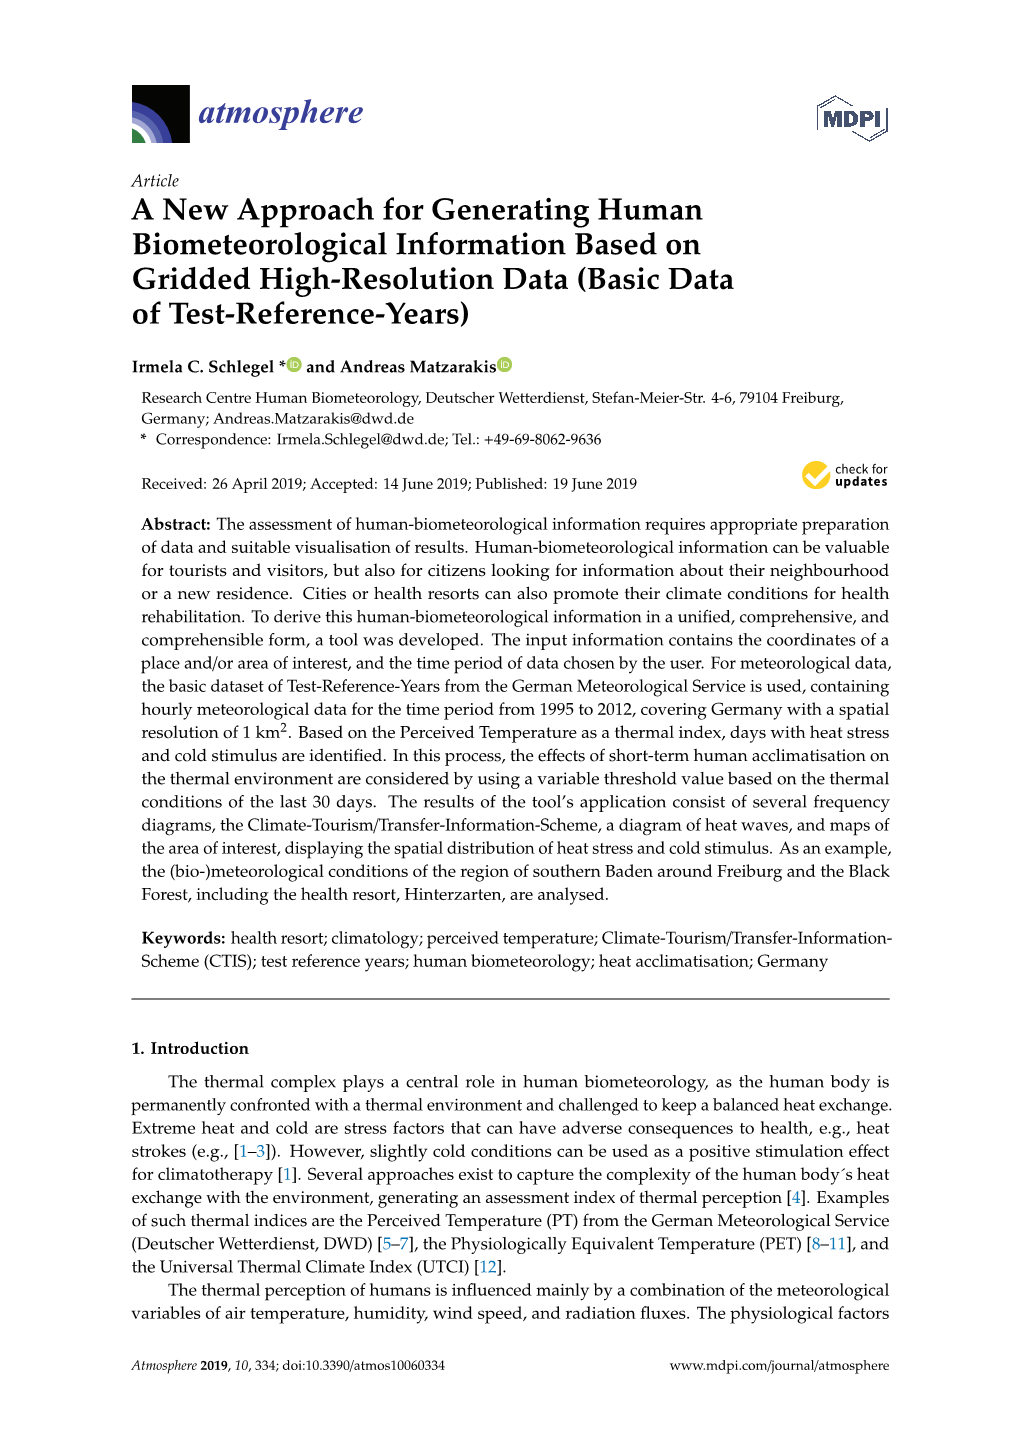 A New Approach for Generating Human Biometeorological Information Based on Gridded High-Resolution Data (Basic Data of Test-Reference-Years)